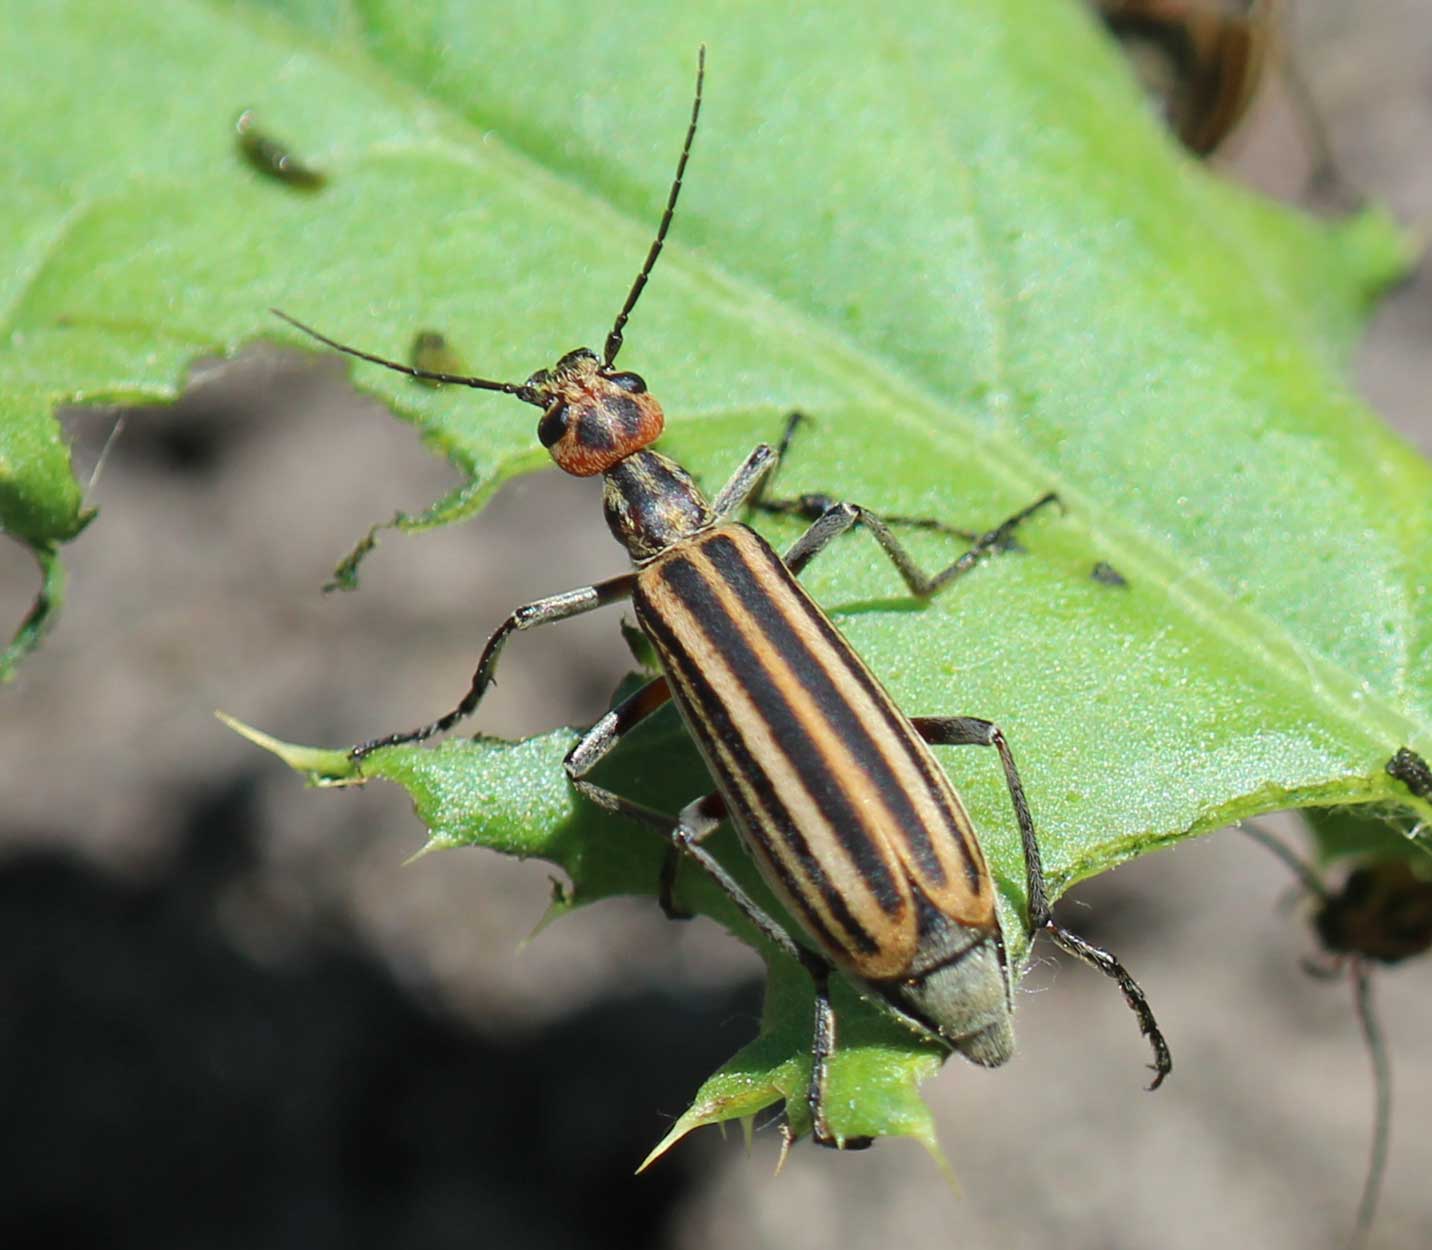 Orange beetle with black stripes and a red head on a green leaf.